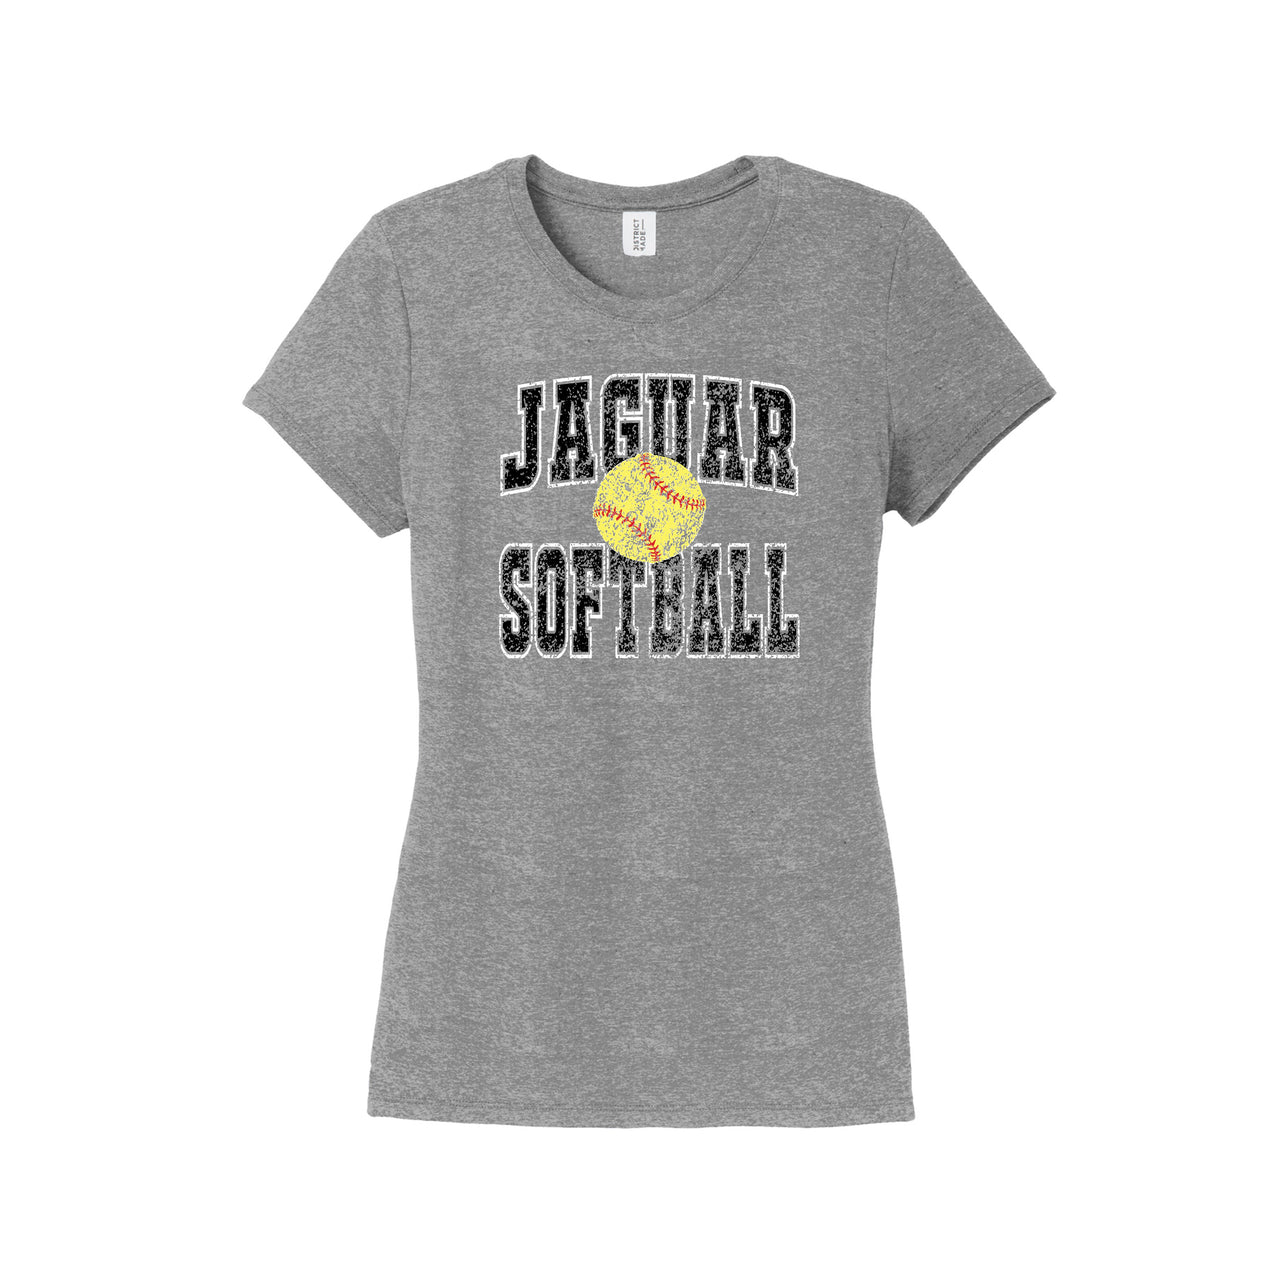 Adult - 6 Apparel Options to pick from (Centennial Jaguars Softball)